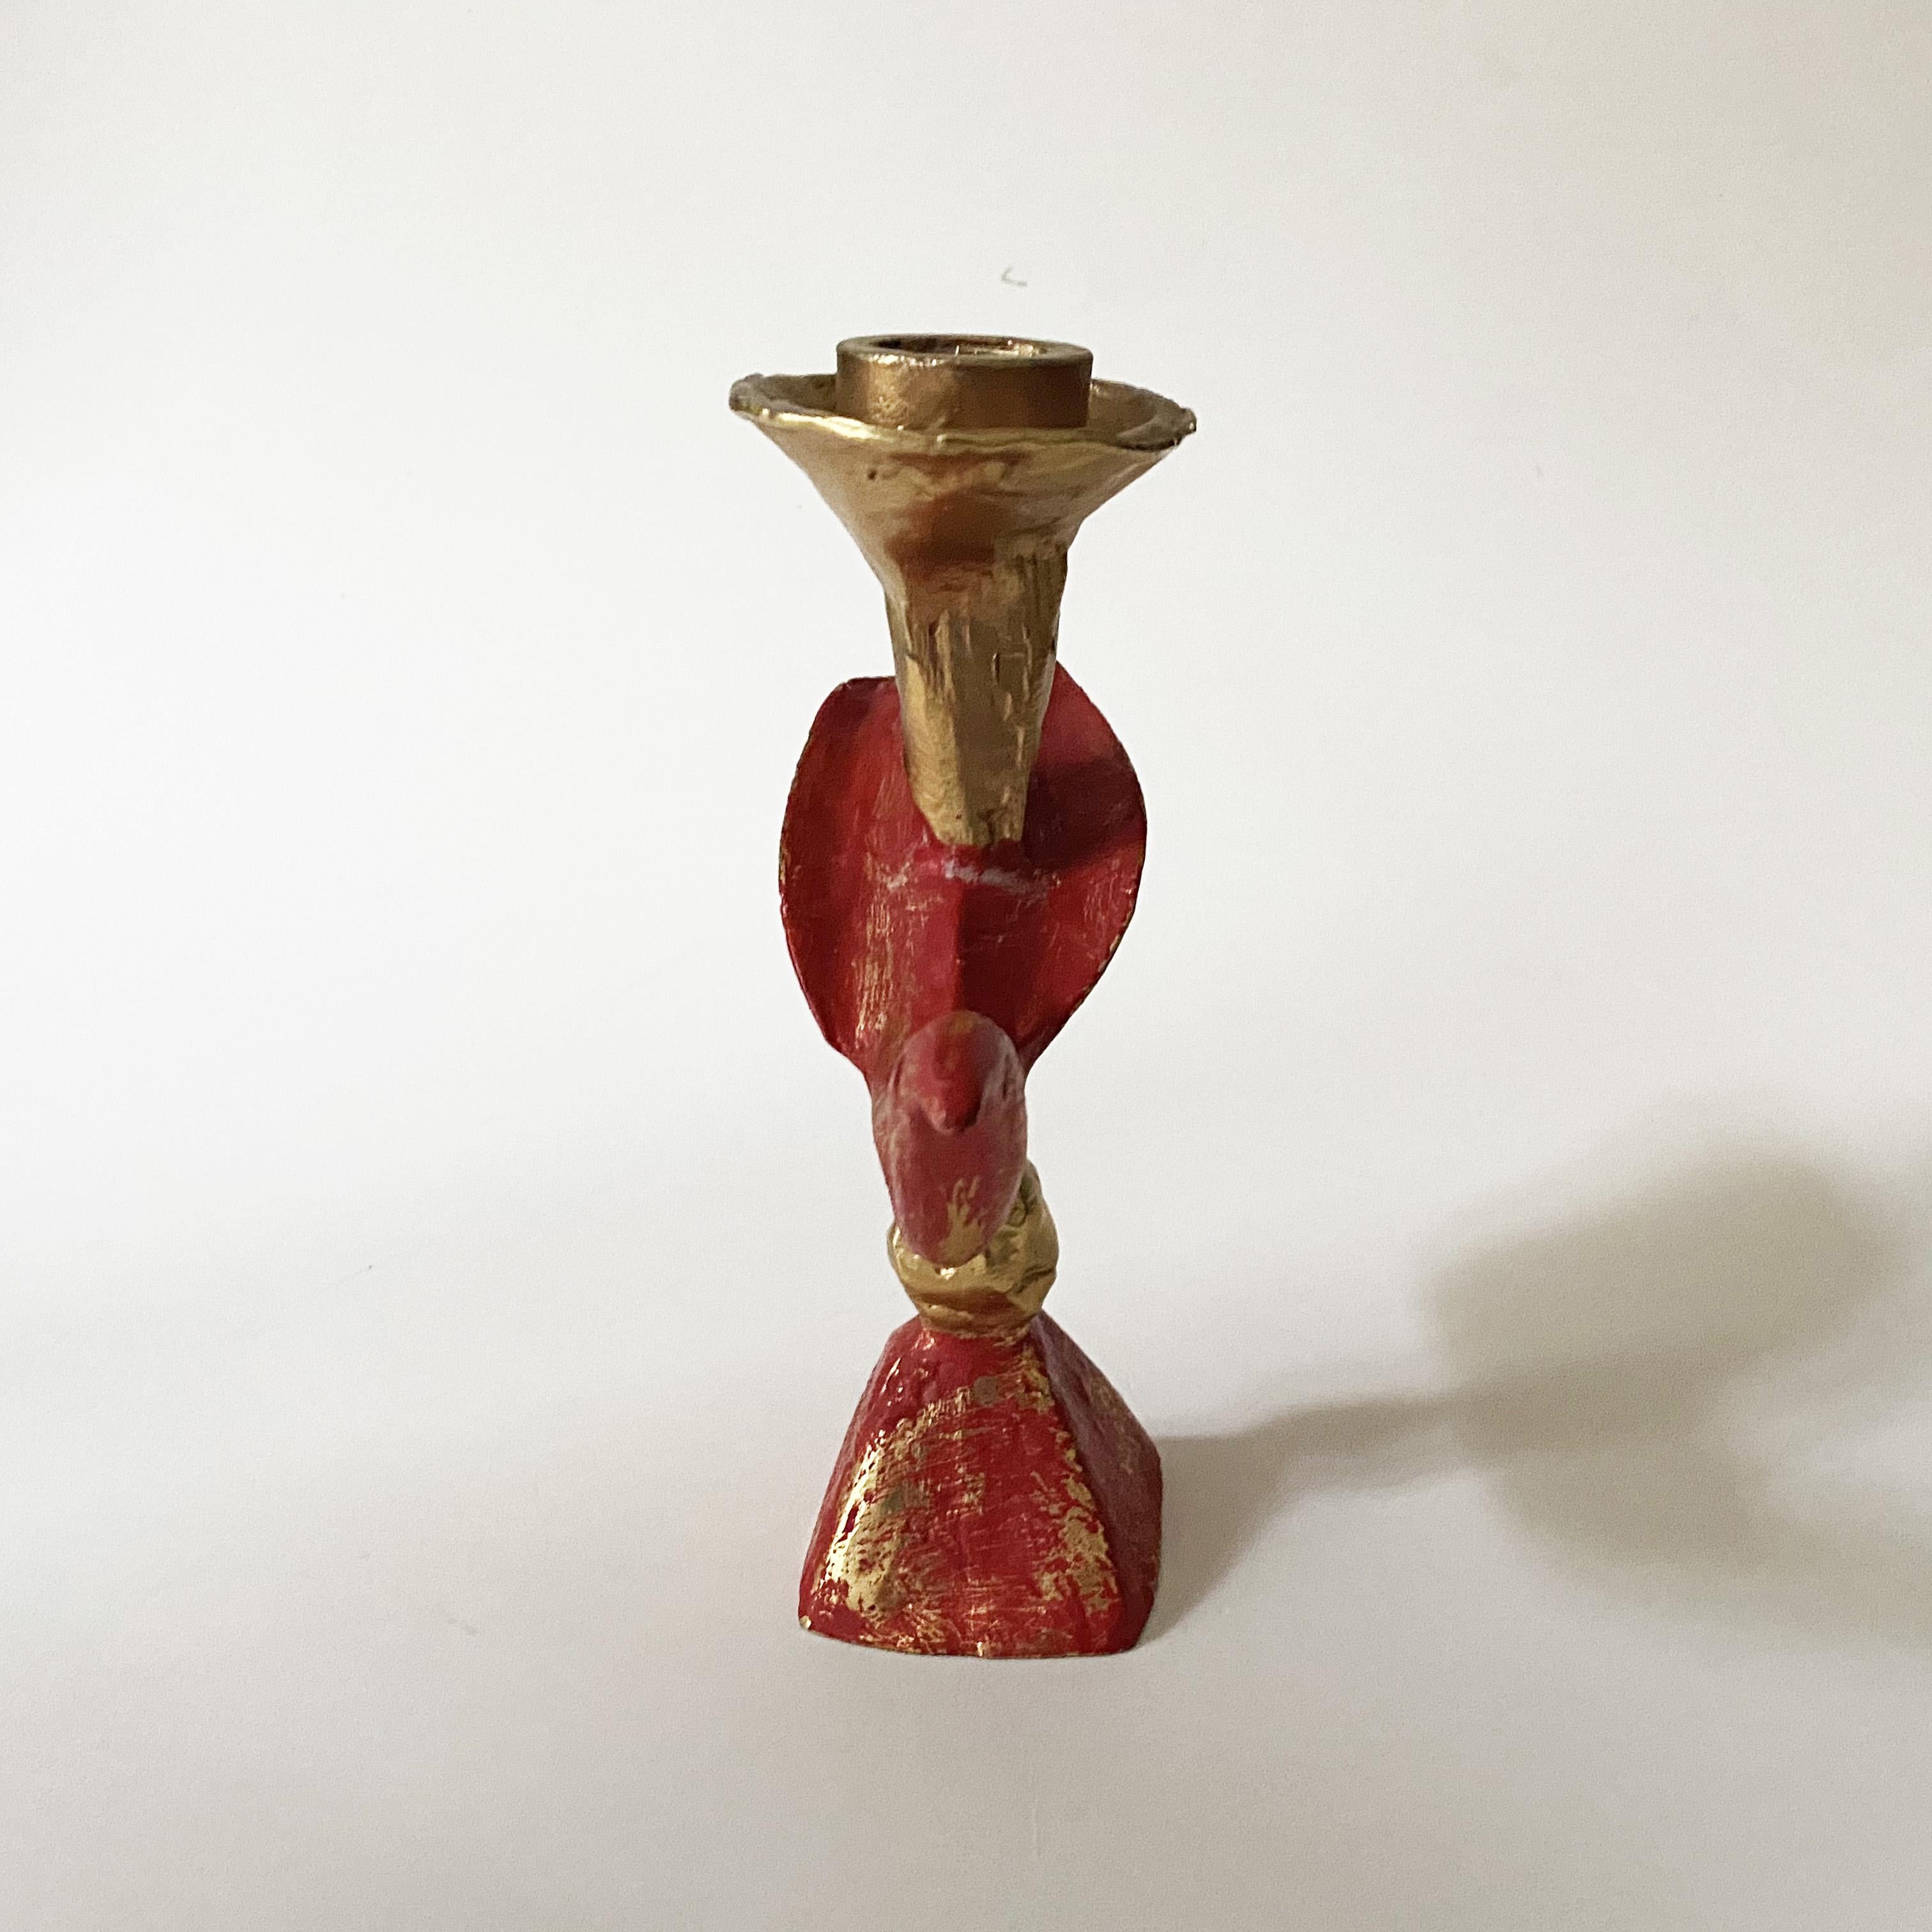 Gilded & Red Sculptural Bird Candlestick by Pierre Casenove for Fondica, 1990s. For Sale 2